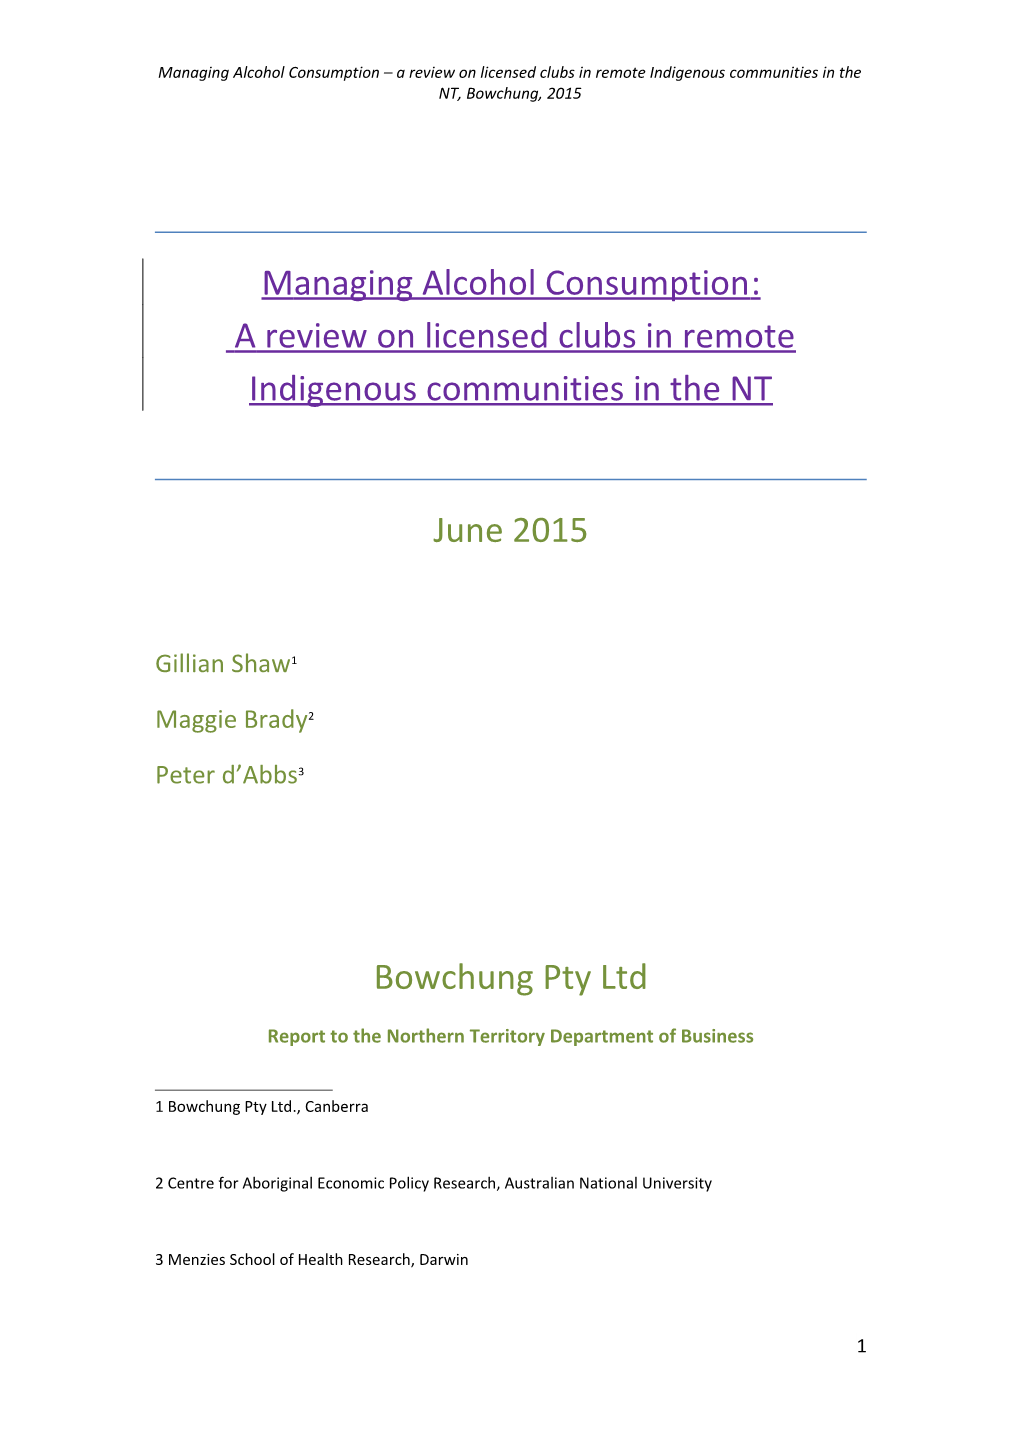 Managing Alcohol Consumption a Review on Licensed Clubs in Remote Indigenous Communities